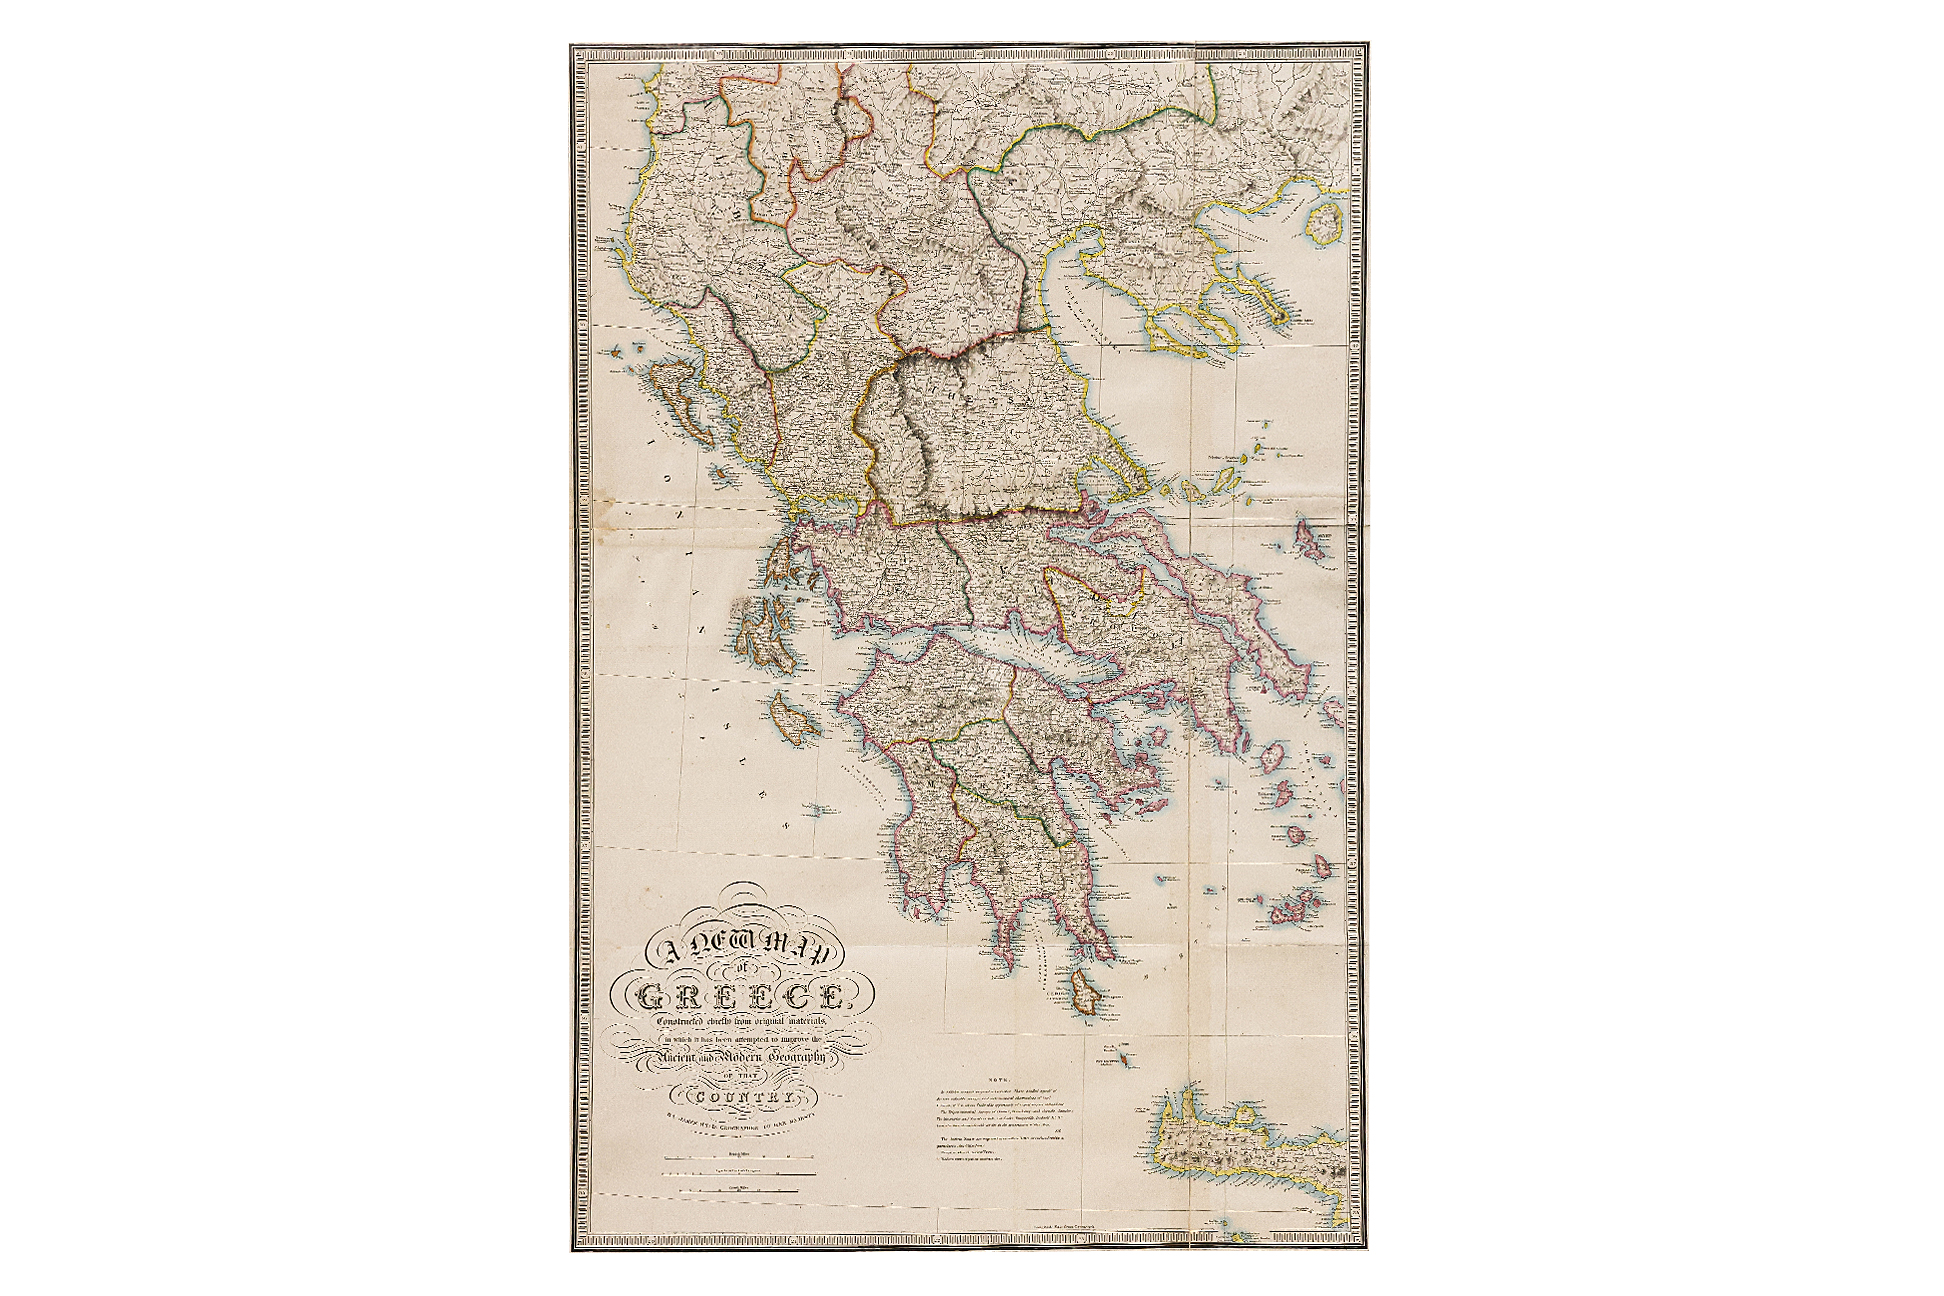 JAMES WYLD, A NEW MAP OF GREECE, C.1850